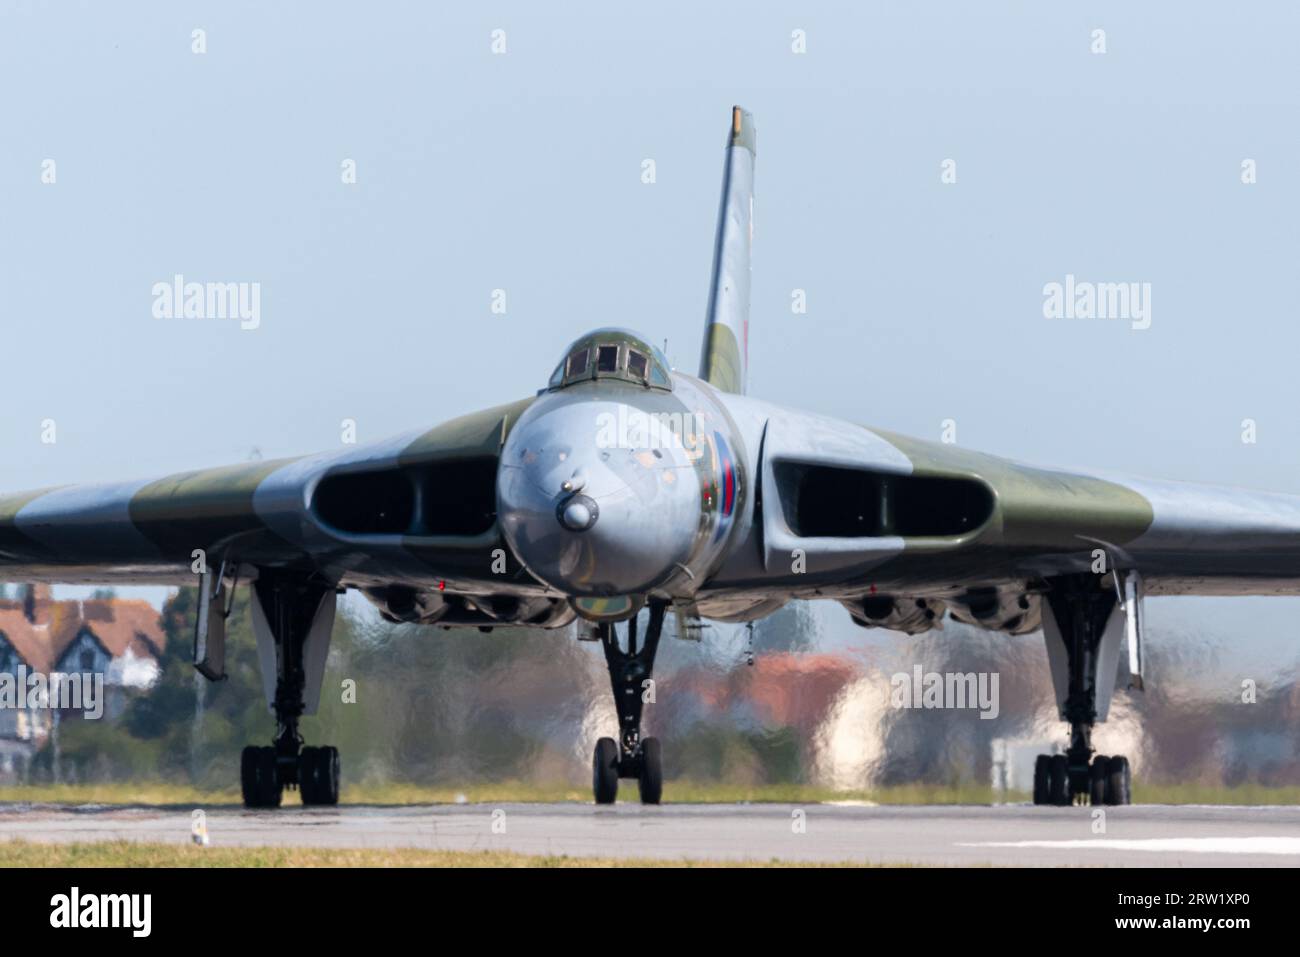 London Southend Airport, Essex, UK. 16th Sep, 2023. A former RAF Cold War Avro Vulcan B2 jet bomber has been run down the runway at London Southend Airport for a special event. The aircraft, serial number XL426, first flew in 1962 & served with the RAF until 1986. It has since been restored to ground running condition by the Vulcan Restoration Trust charity which is entirely public donation funded. A limited number of paying guests viewed from inside the airport. The Trust's operation and engineering teams are all volunteers Stock Photo